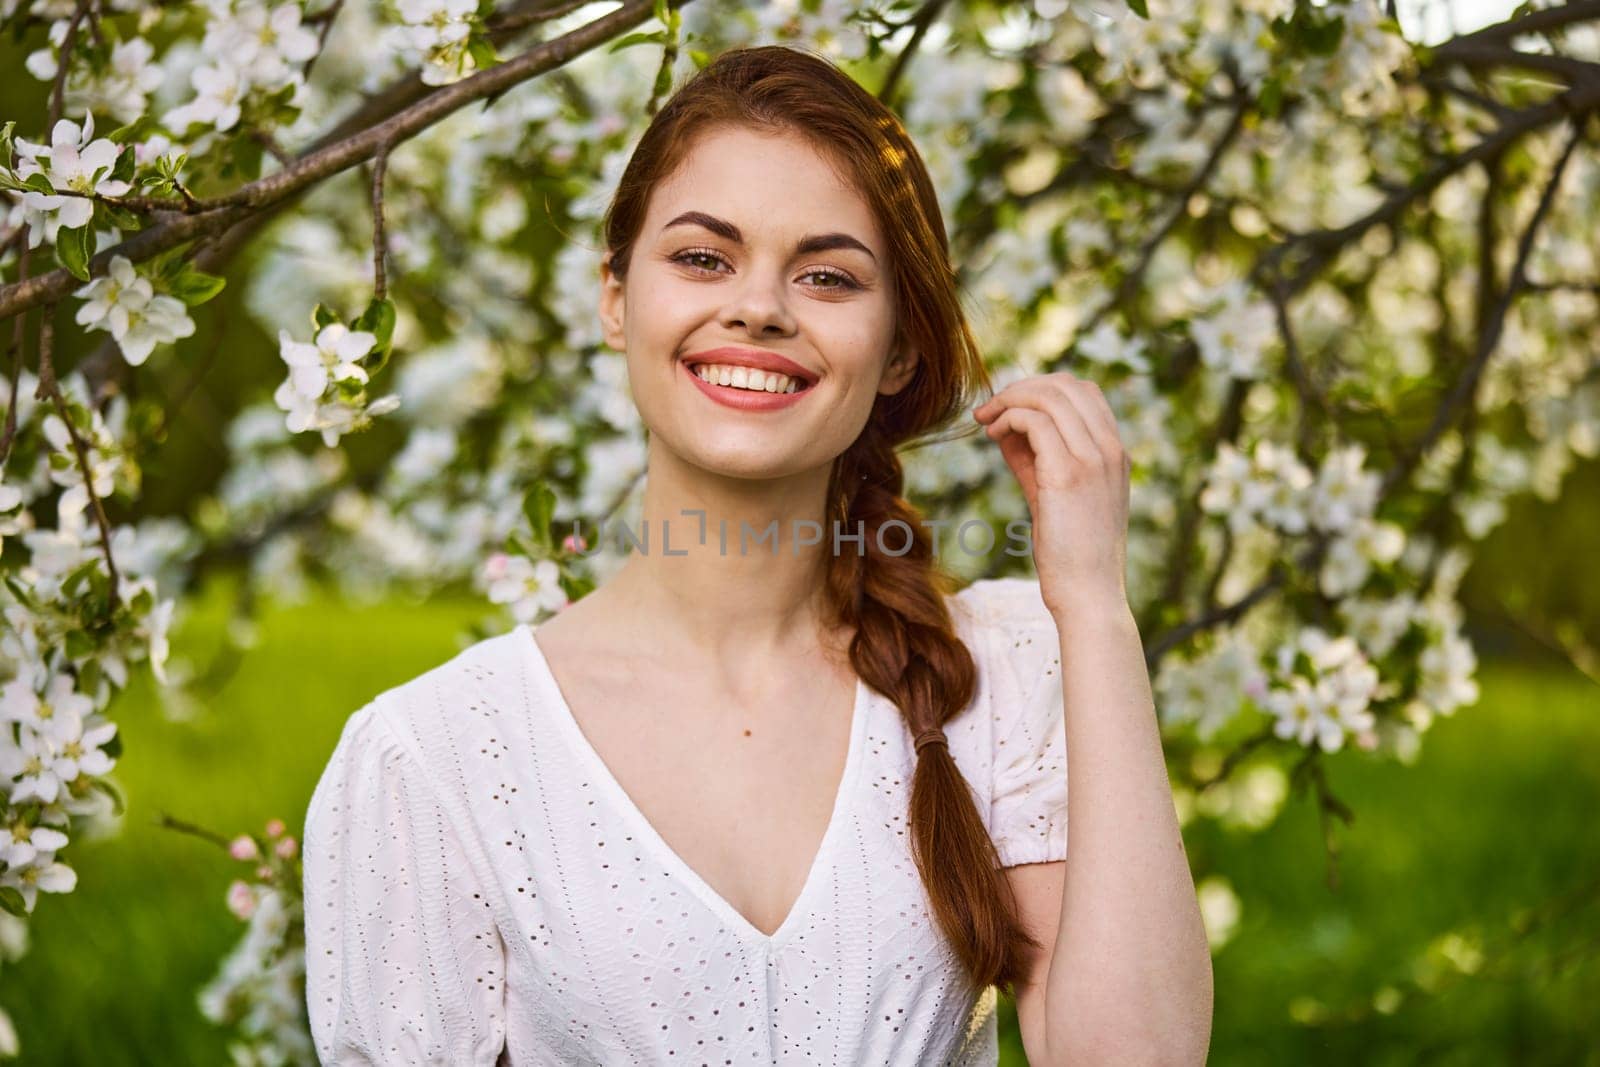 a joyful, carefree woman in a light dress stands against the background of a flowering tree by Vichizh